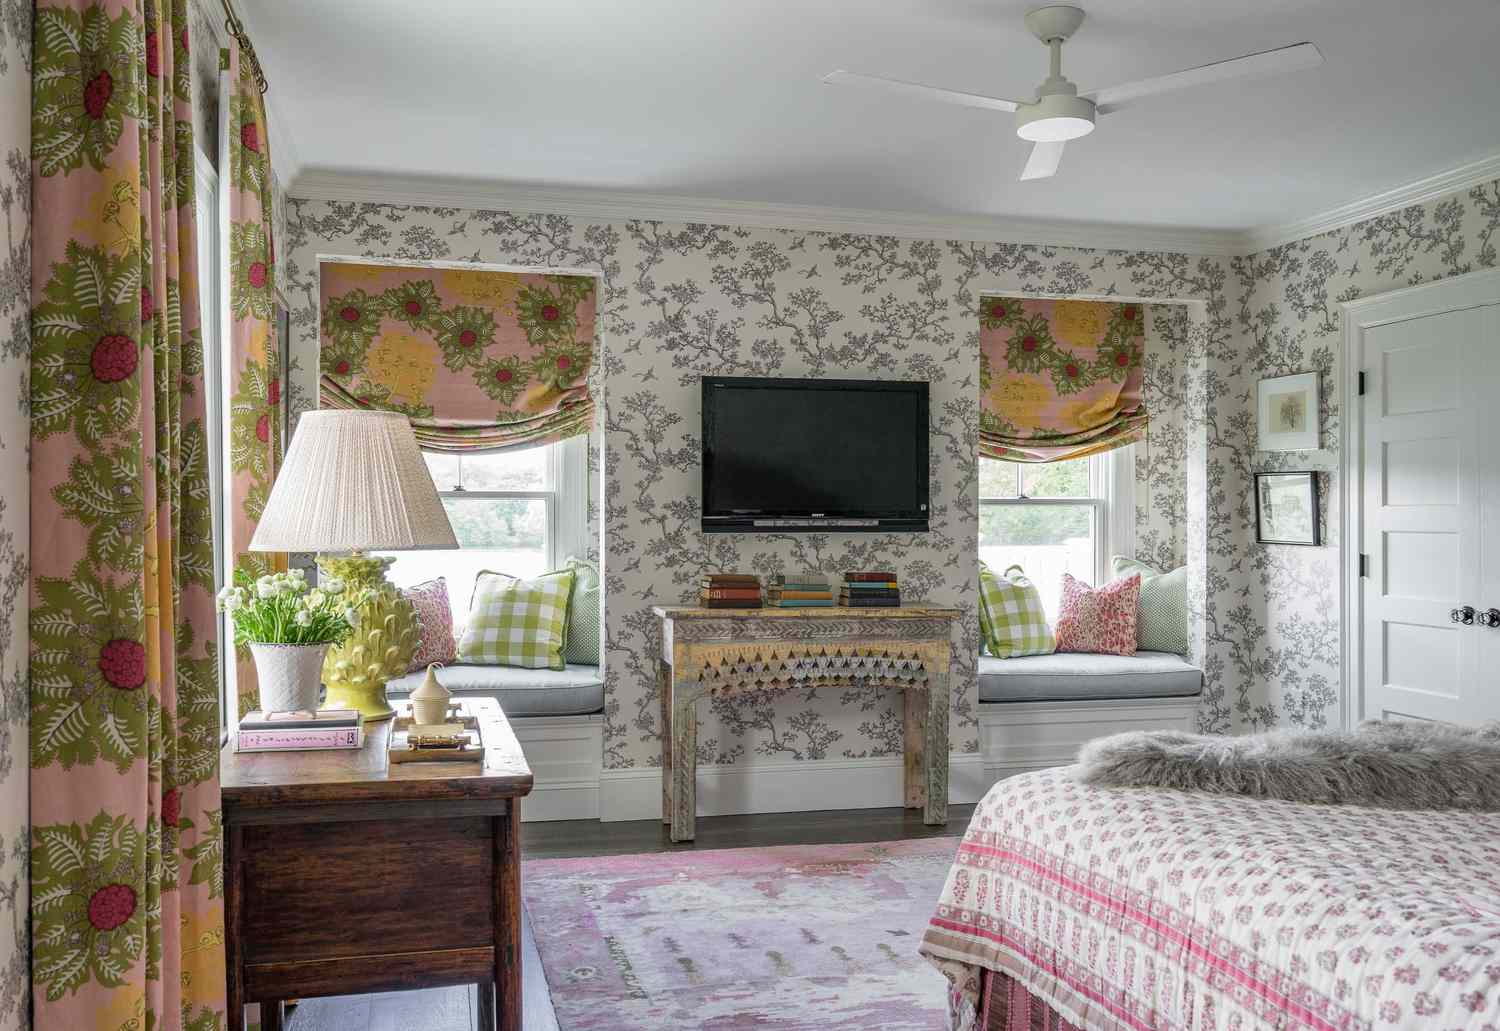 floral wallpaper adorns the walls of this cottagecore bedroom with floral window treatments, fresh flowers, and a floral quilt